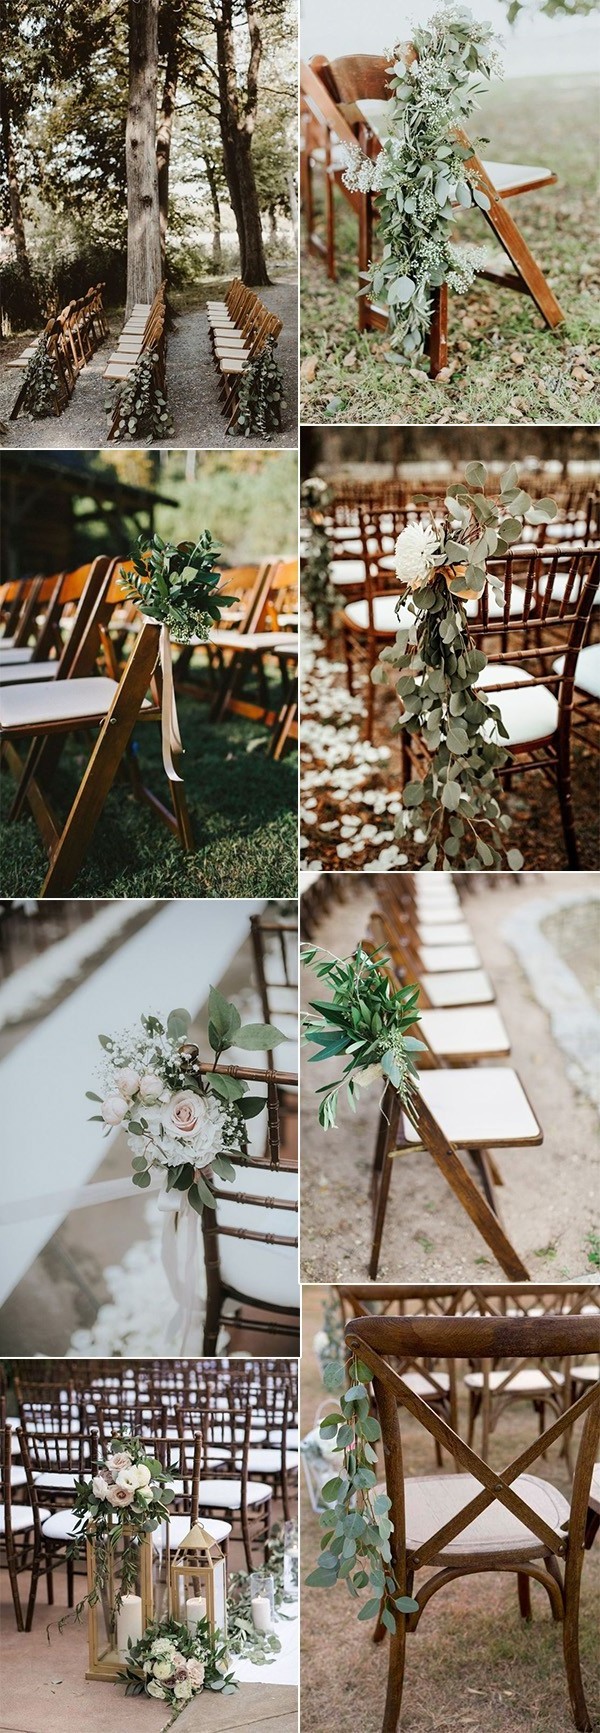 chic outdoor wedding aisle decoration ideas with greenery